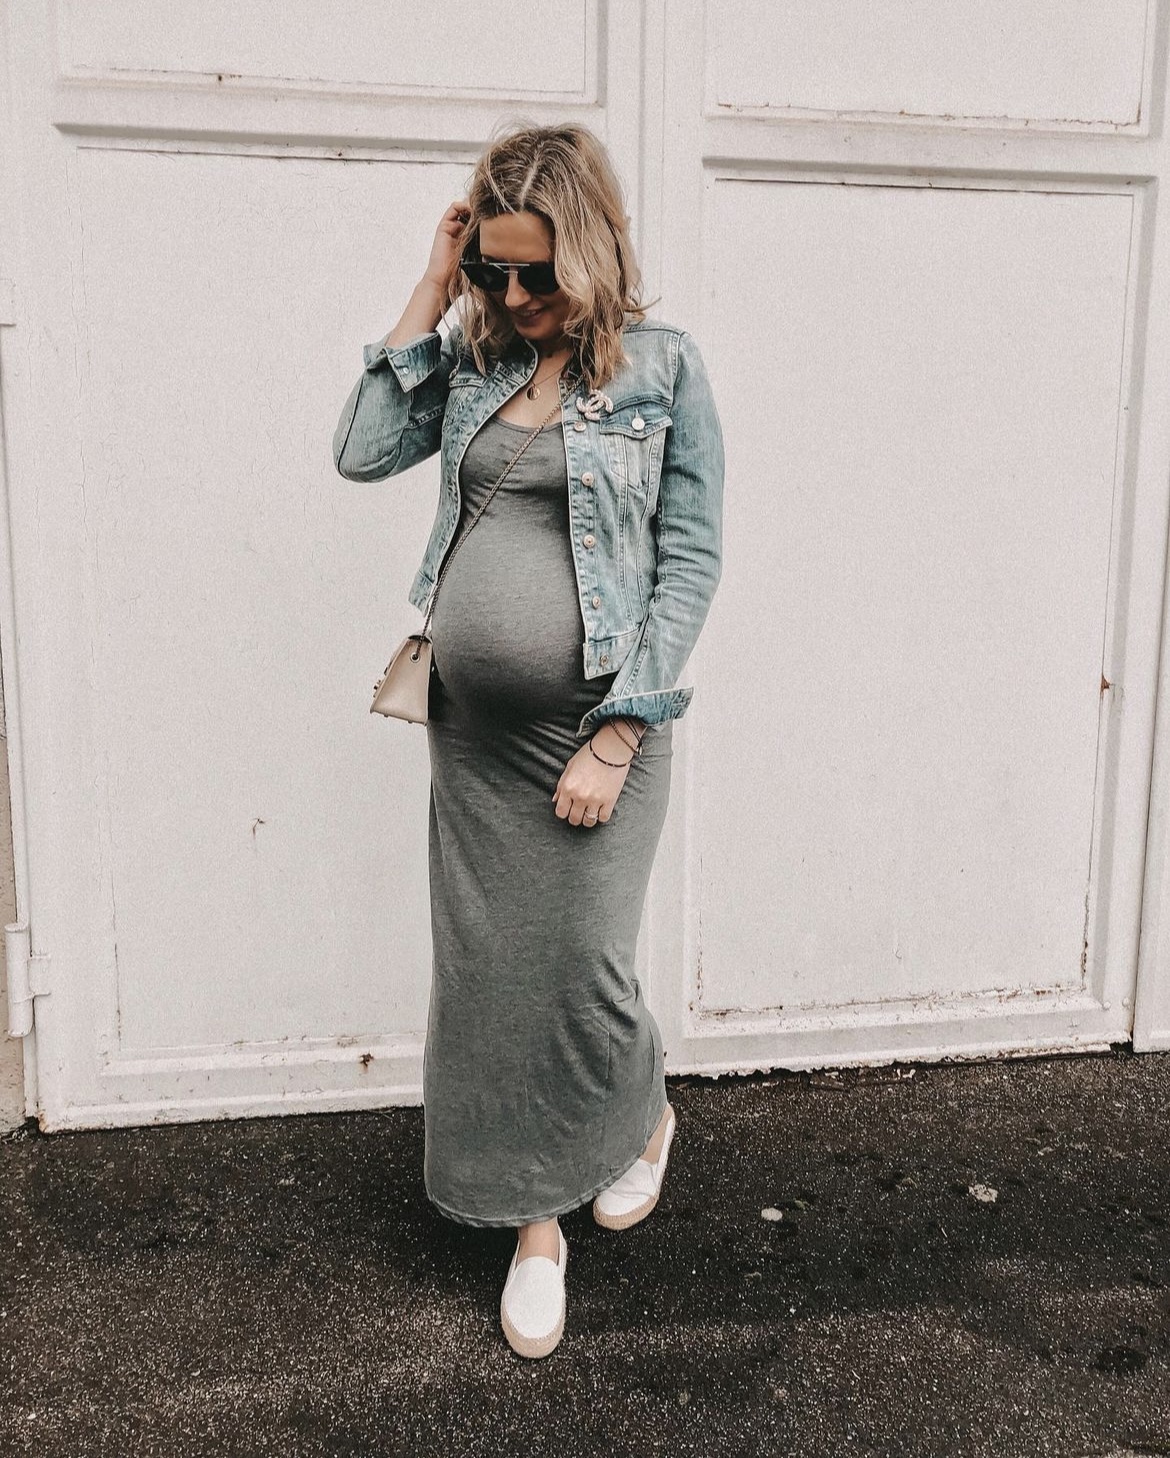 Spring Maternity Style You Need in Your Pregnancy Wardrobe - Oak +